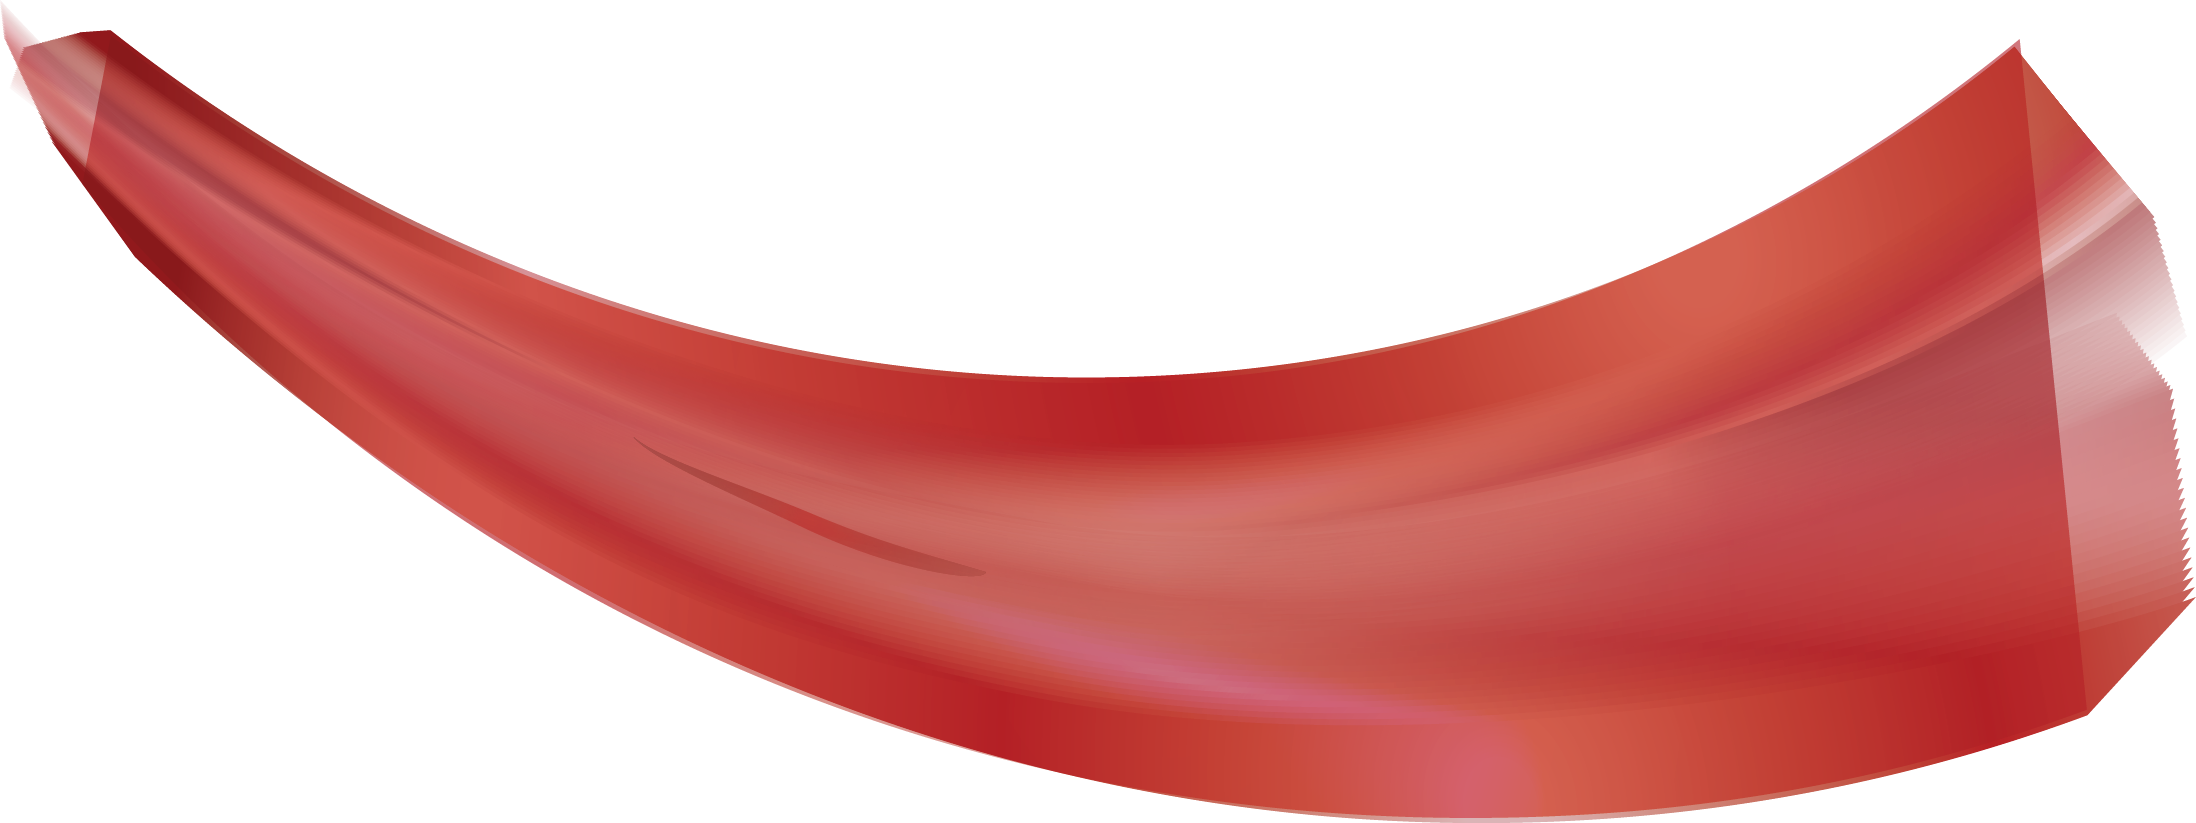 Red Wave PNG Picture